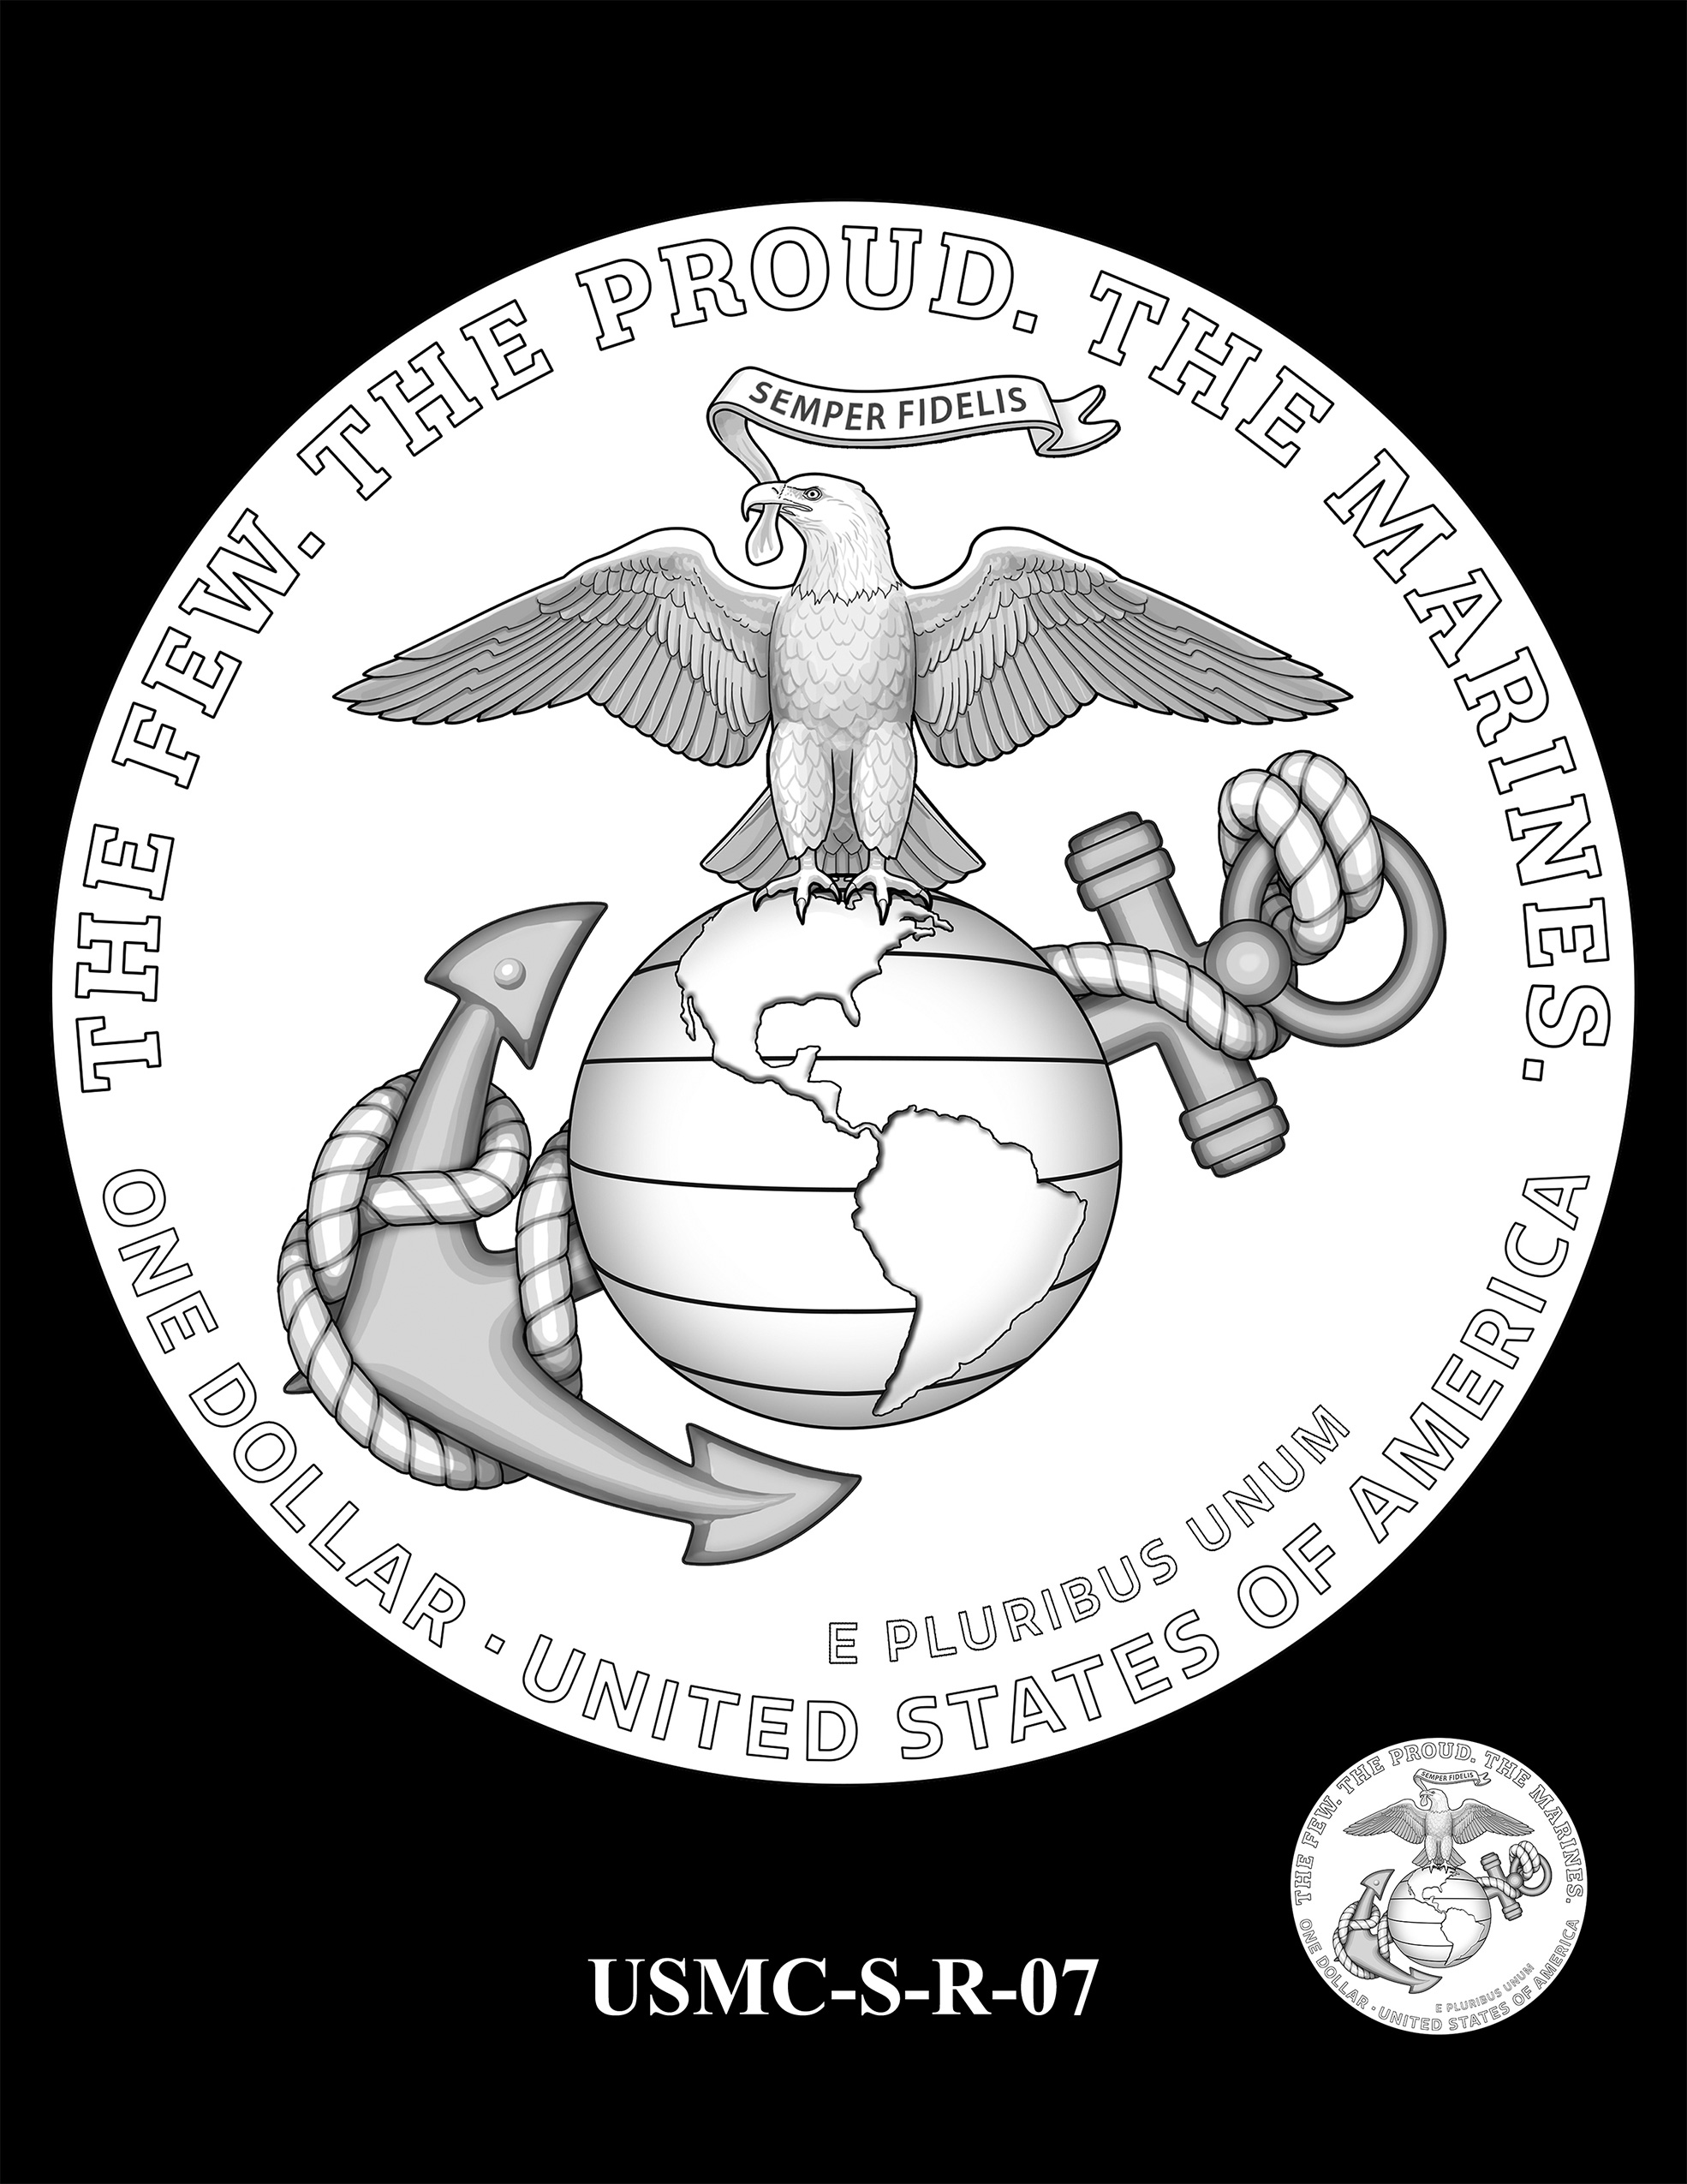 USMC-S-R-07 -- 250th Anniversary of the United States Marine Corps - Silver